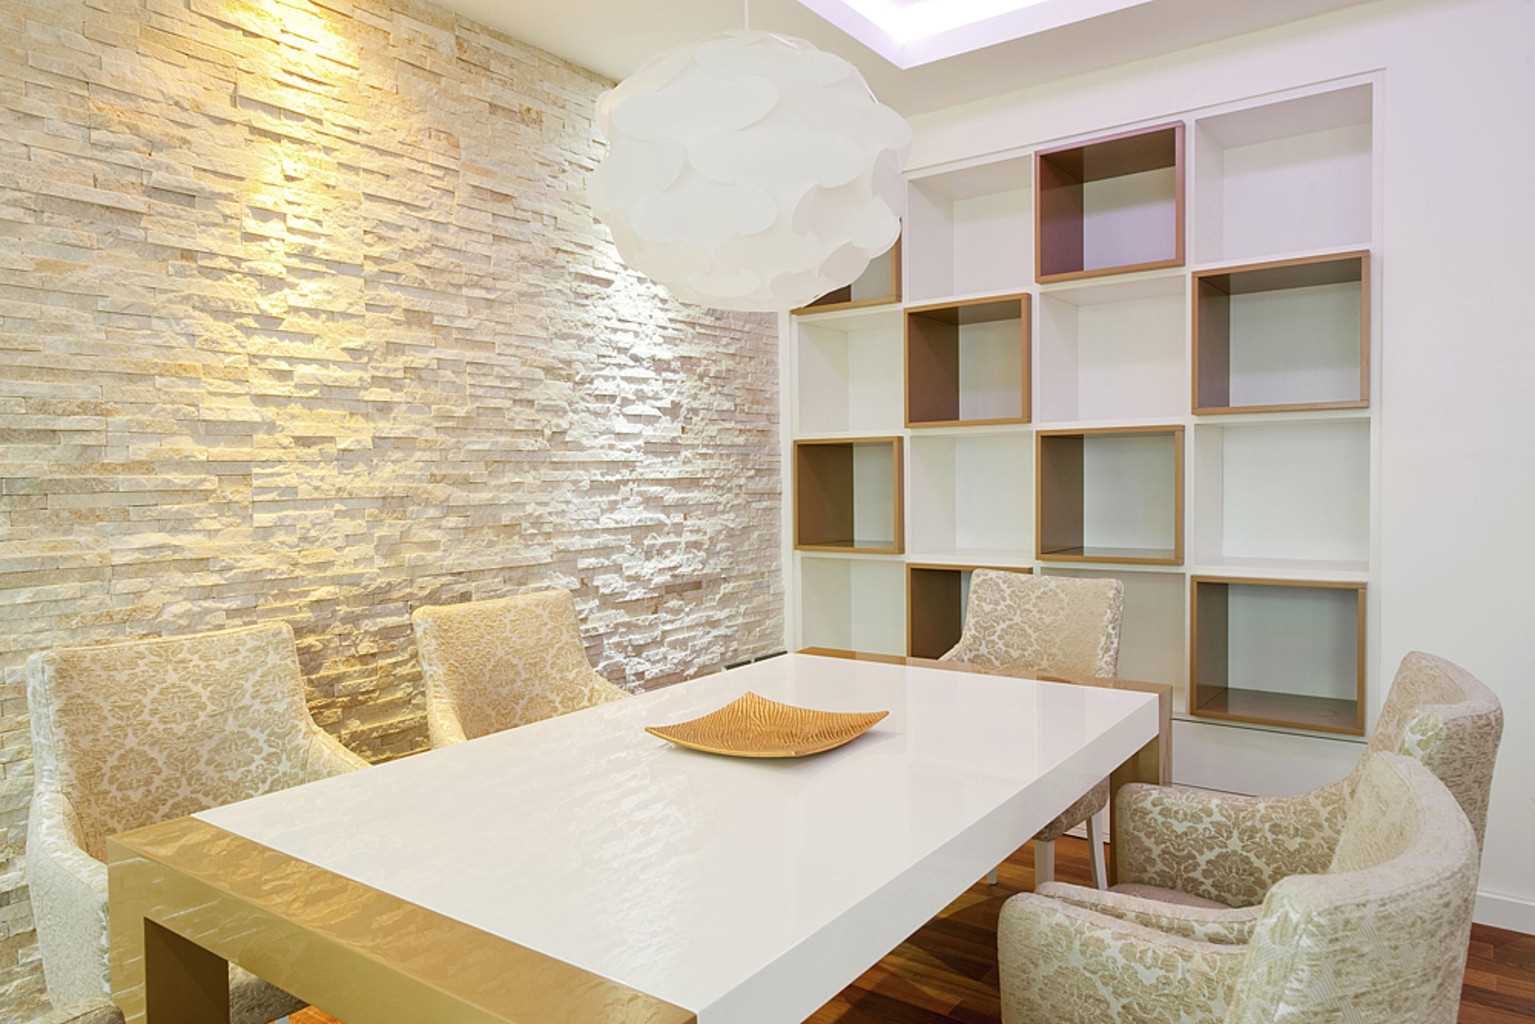 the idea of ​​an original decorative stone in the style of an apartment